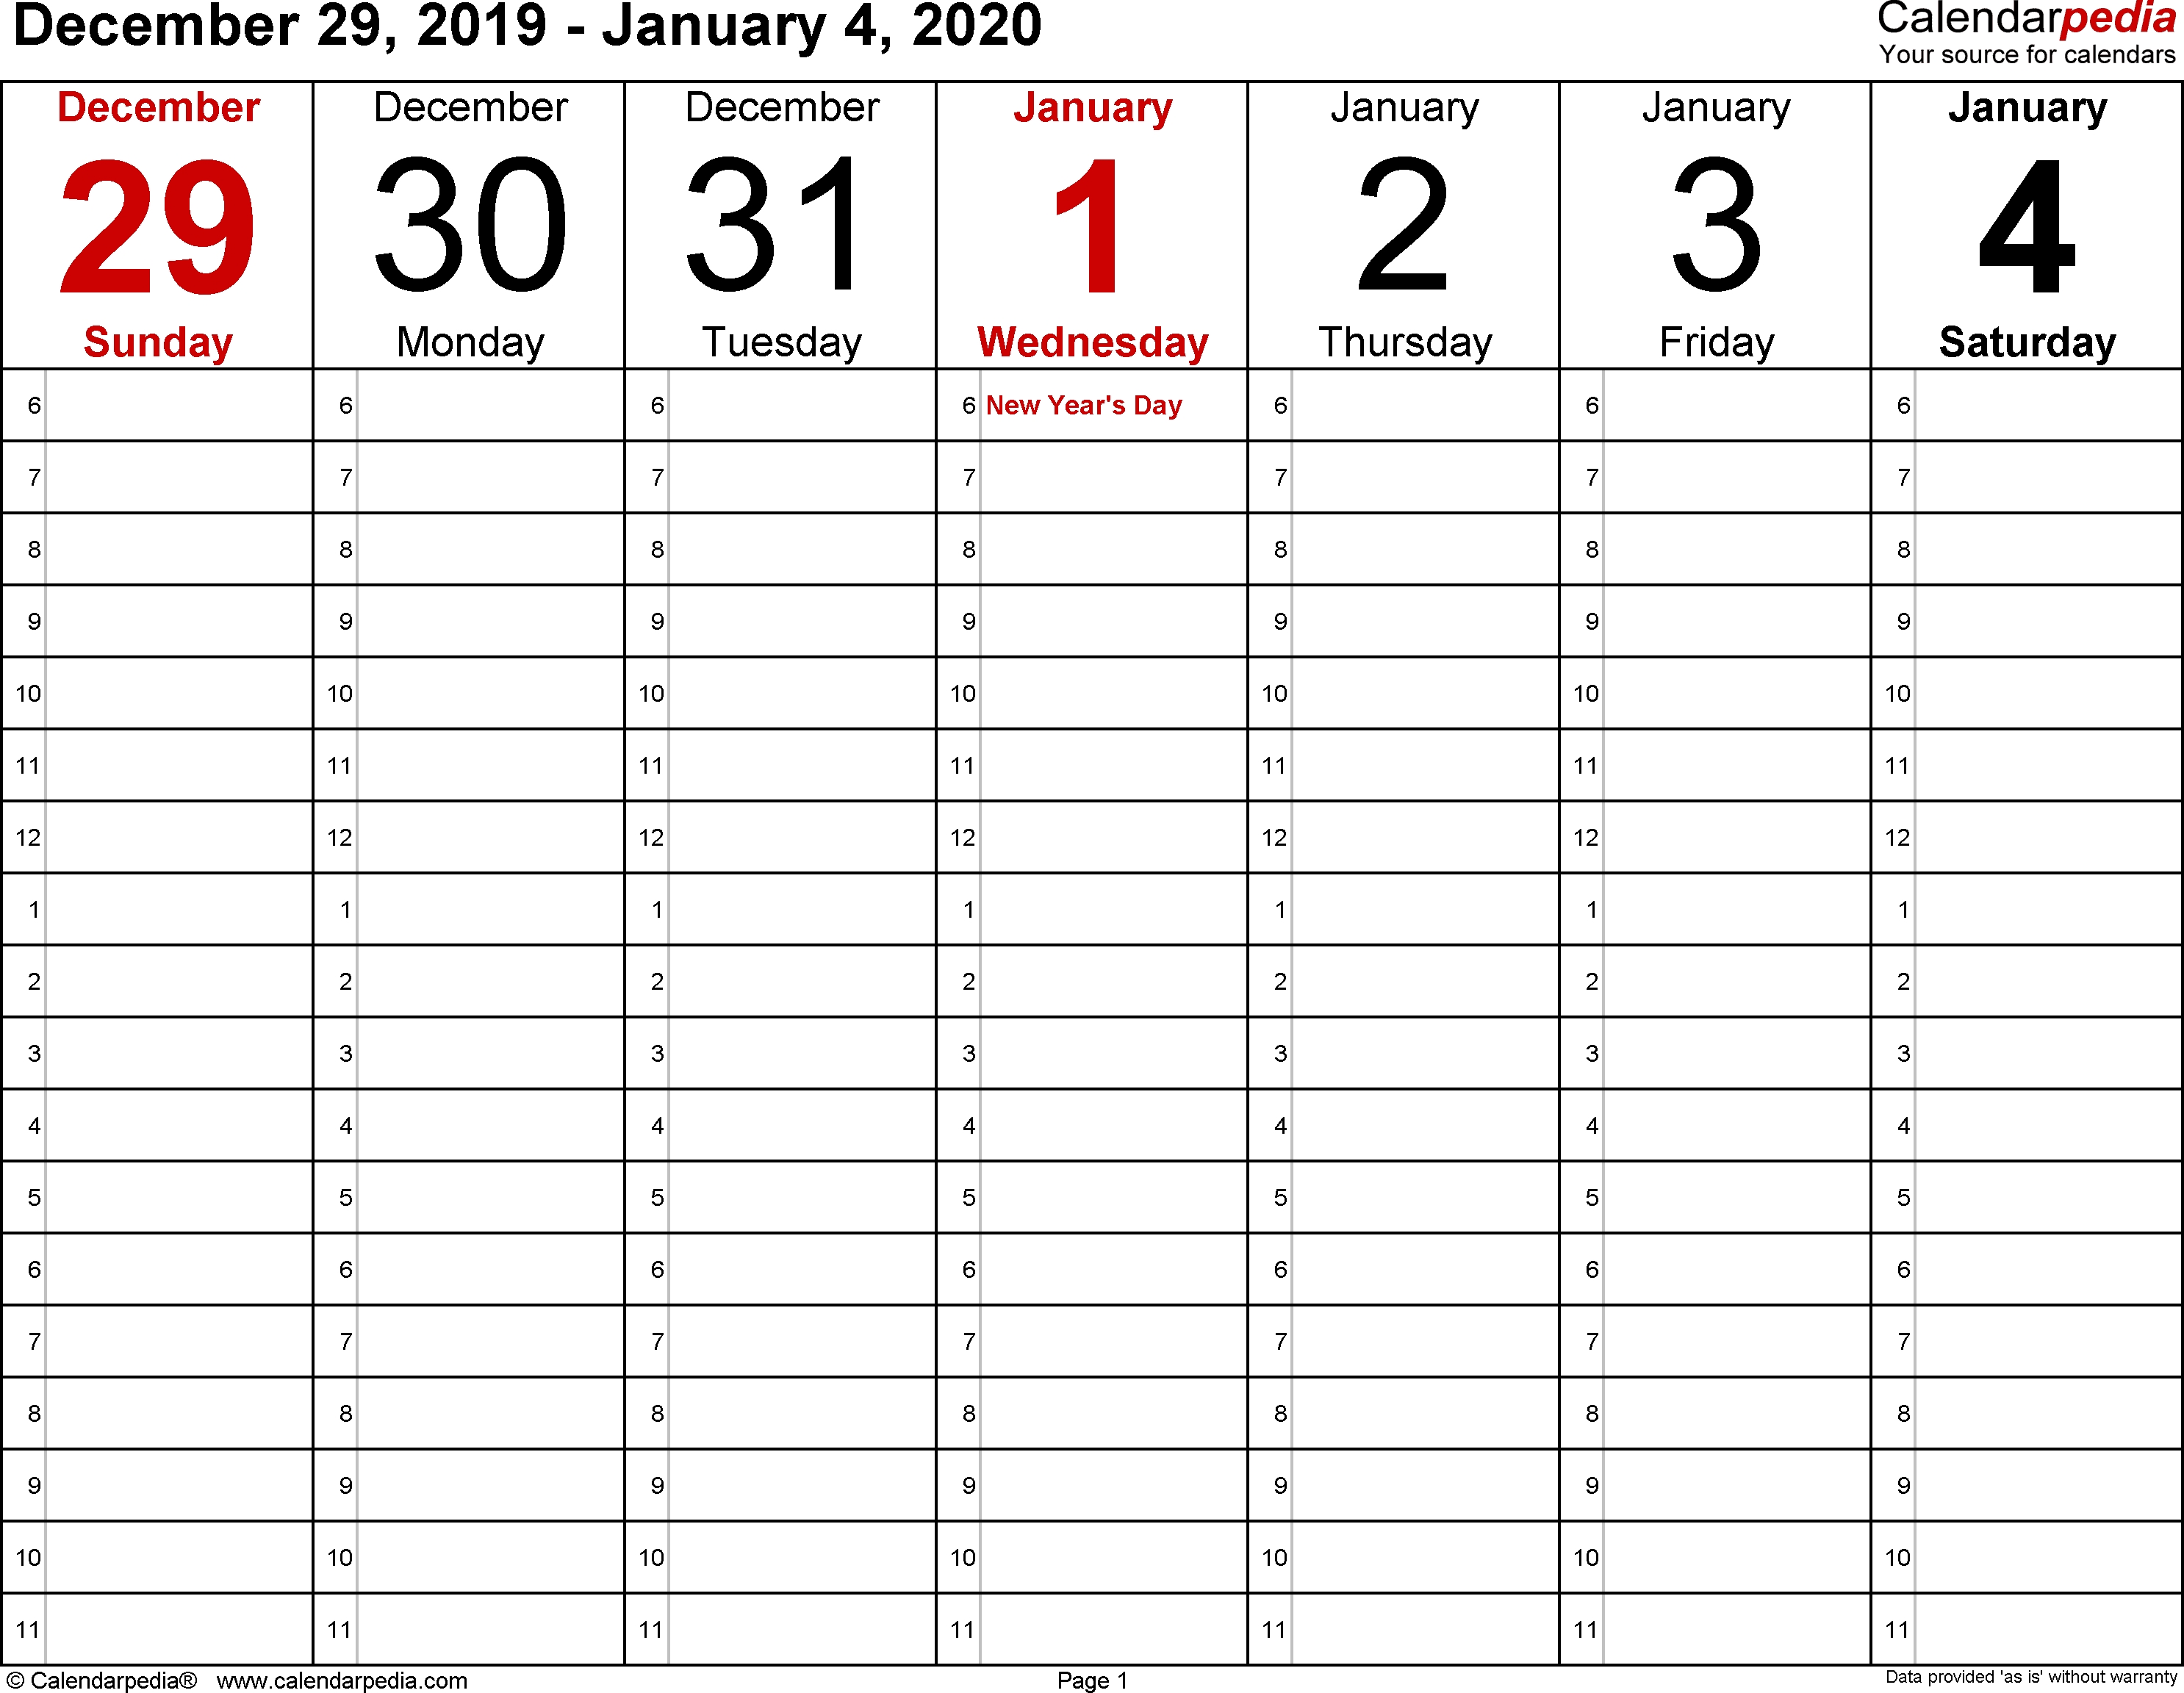 Weekly Calendar 2020 For Word - 12 Free Printable Templates intended for Large Printable Calendar 2020